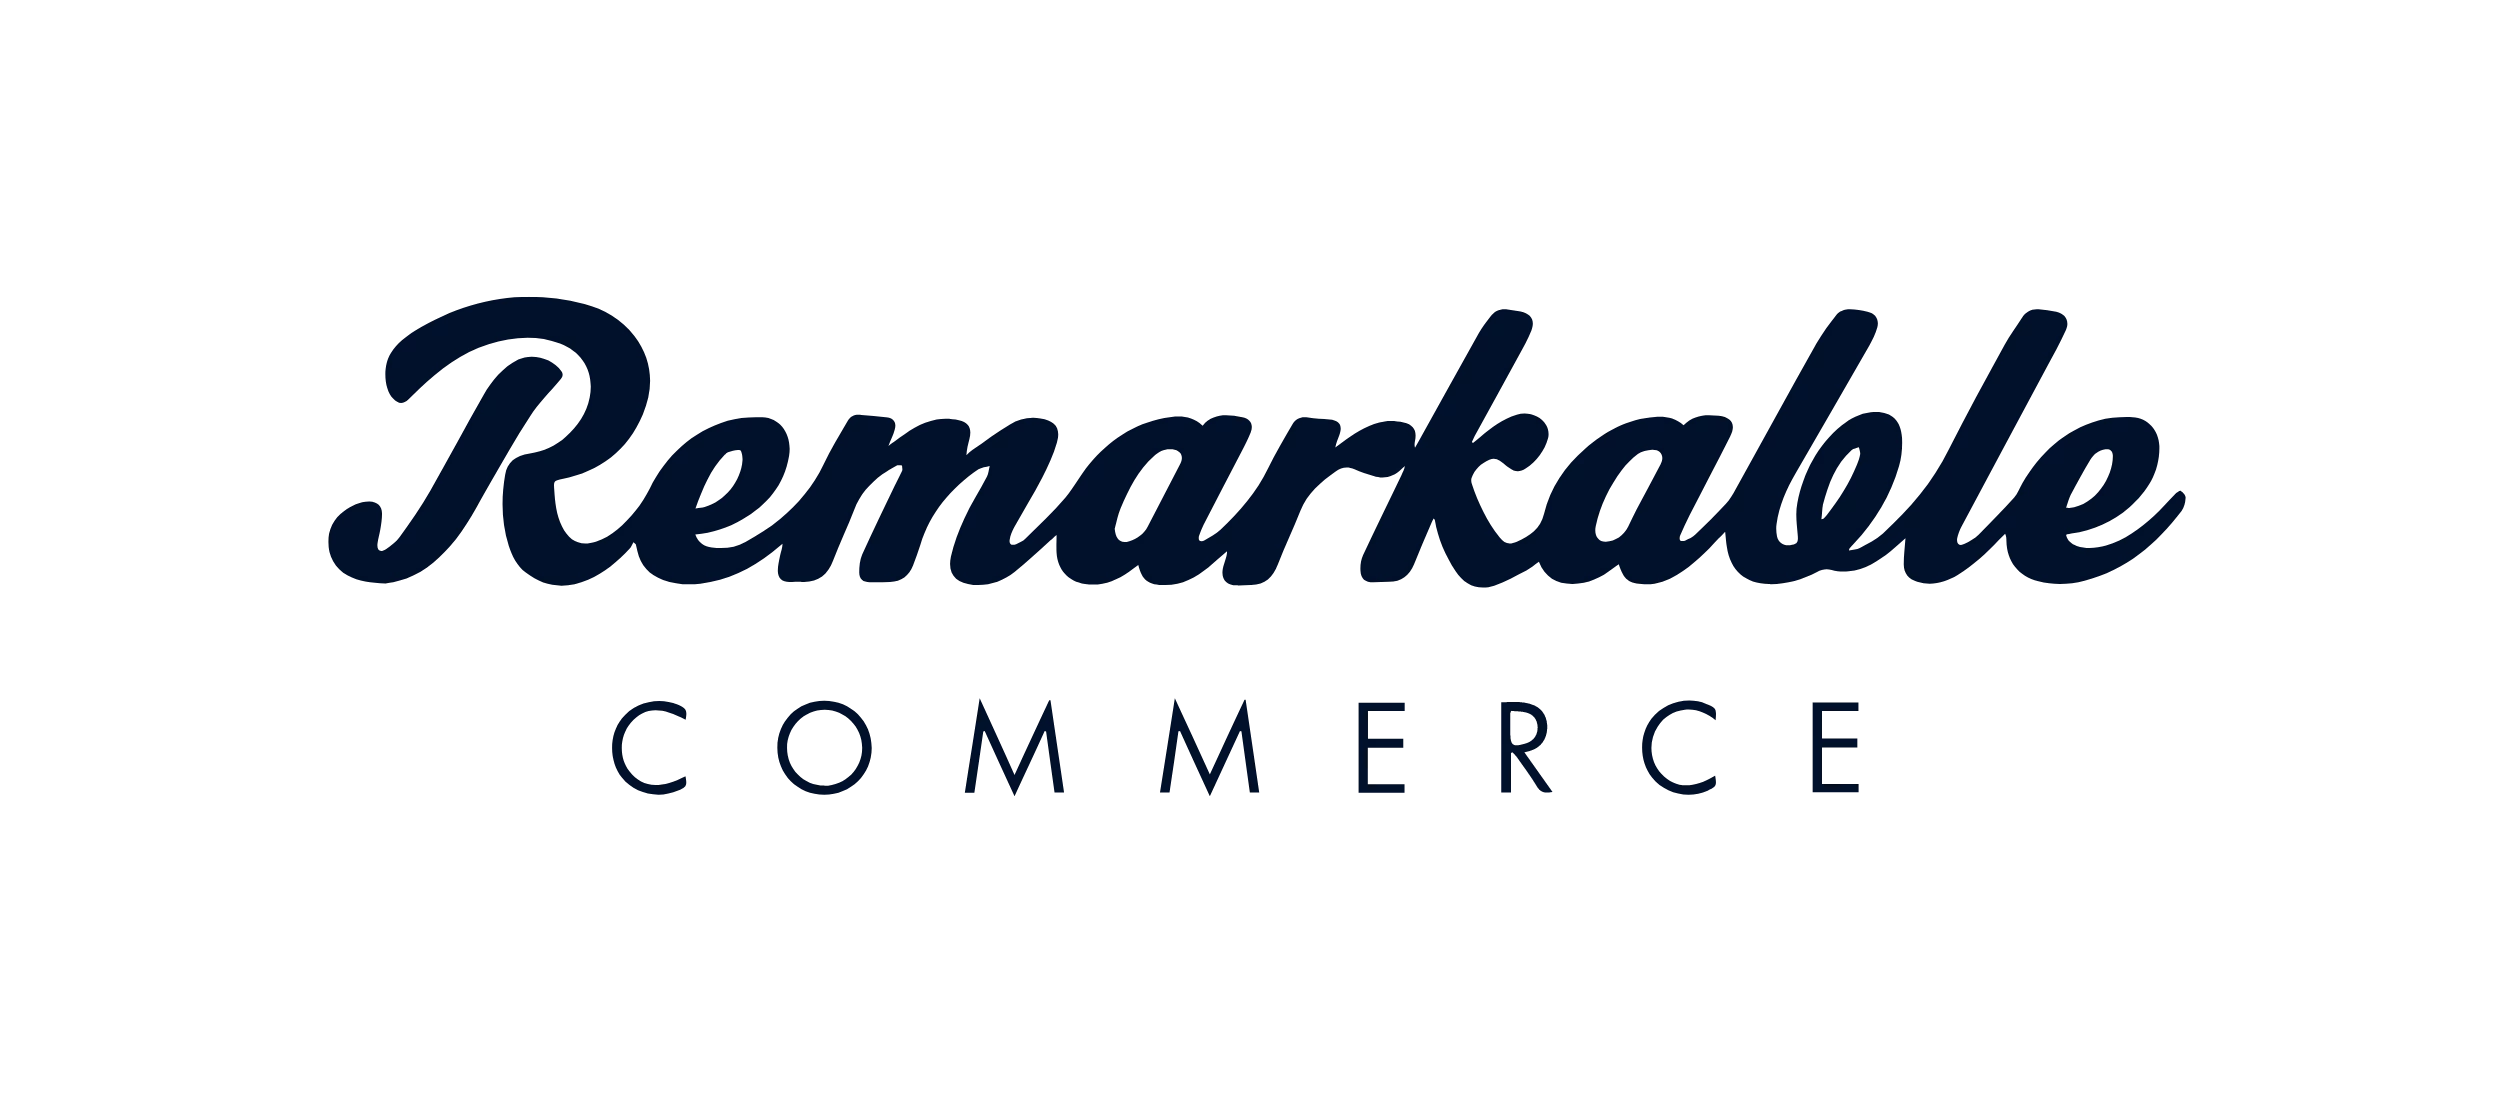 Testimonial video from Remarkable Commerce